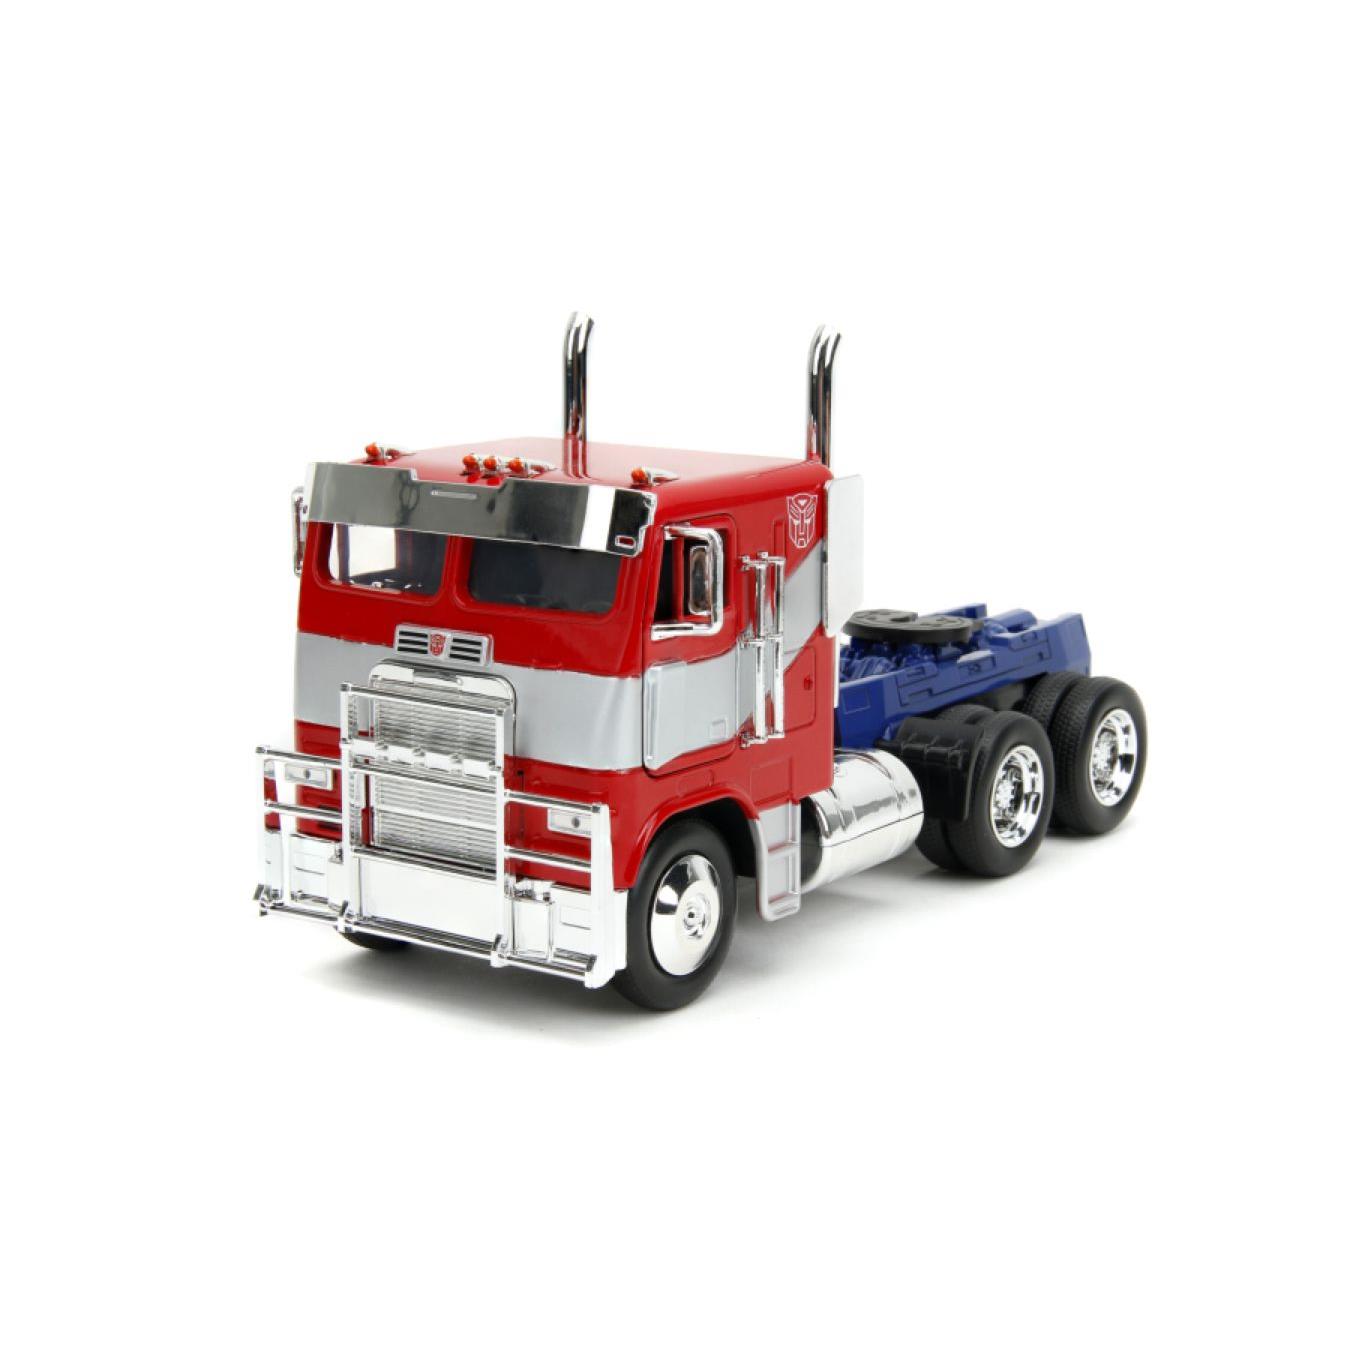 transformers: rise of the beasts - optimus prime 1:24 scale vehicle